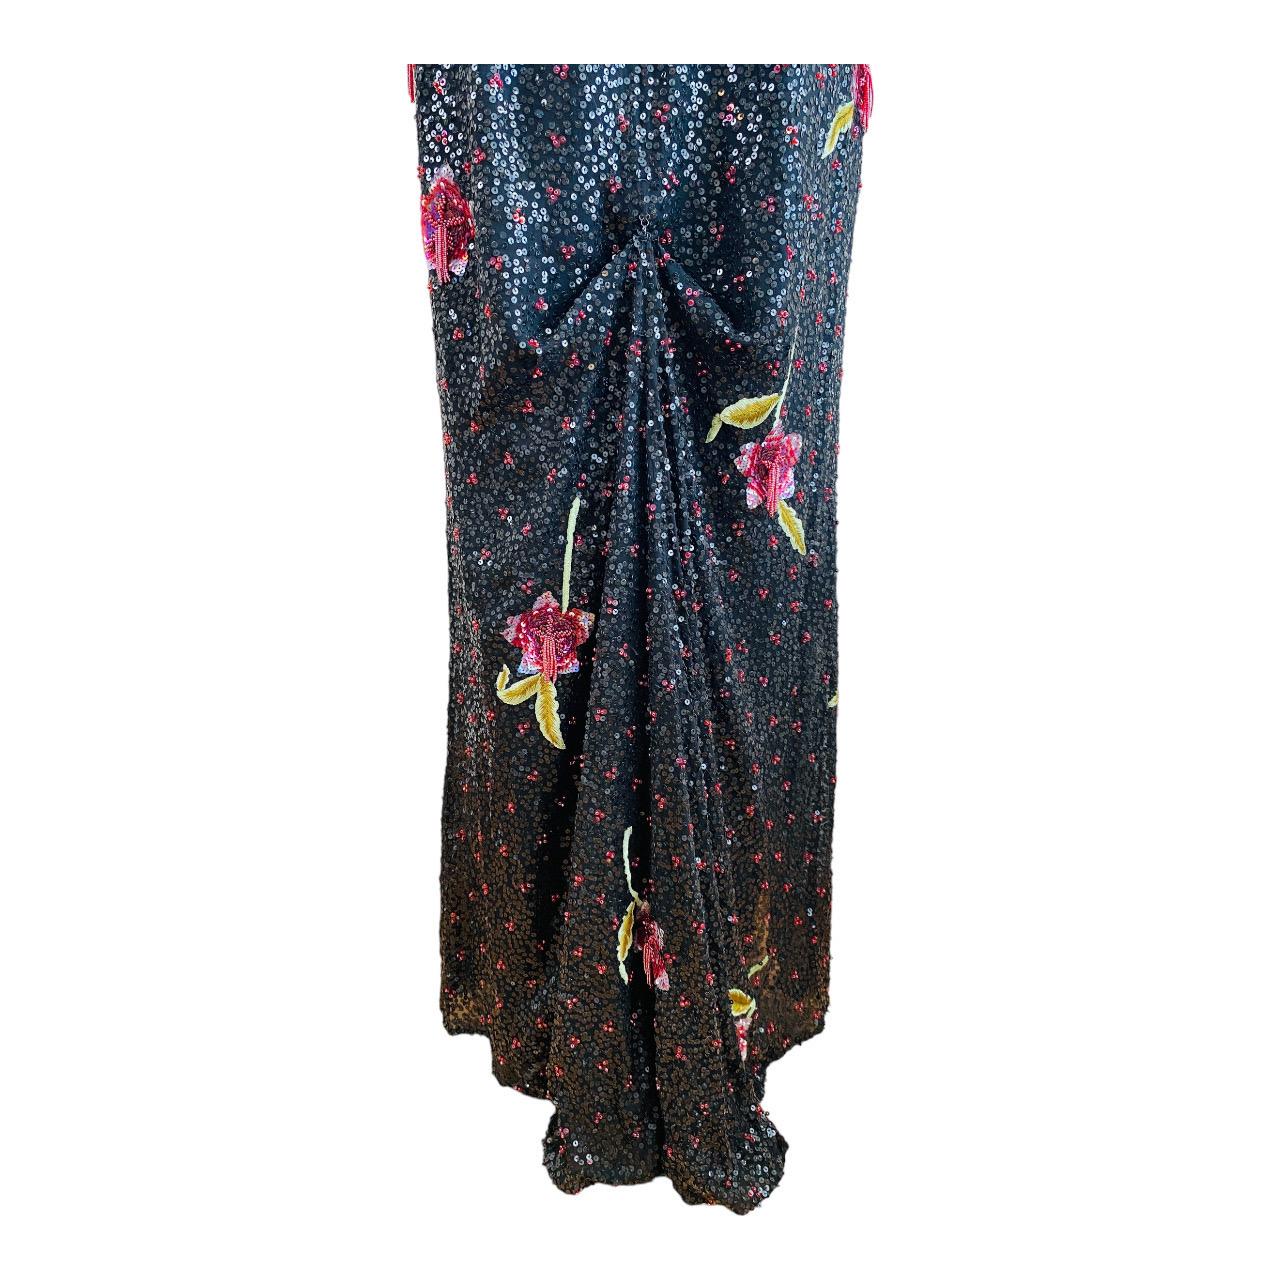 Vintage 2002 Escada Hand Beaded Sequin Floral Maxi Dress Gown Black Pink Flowers 11